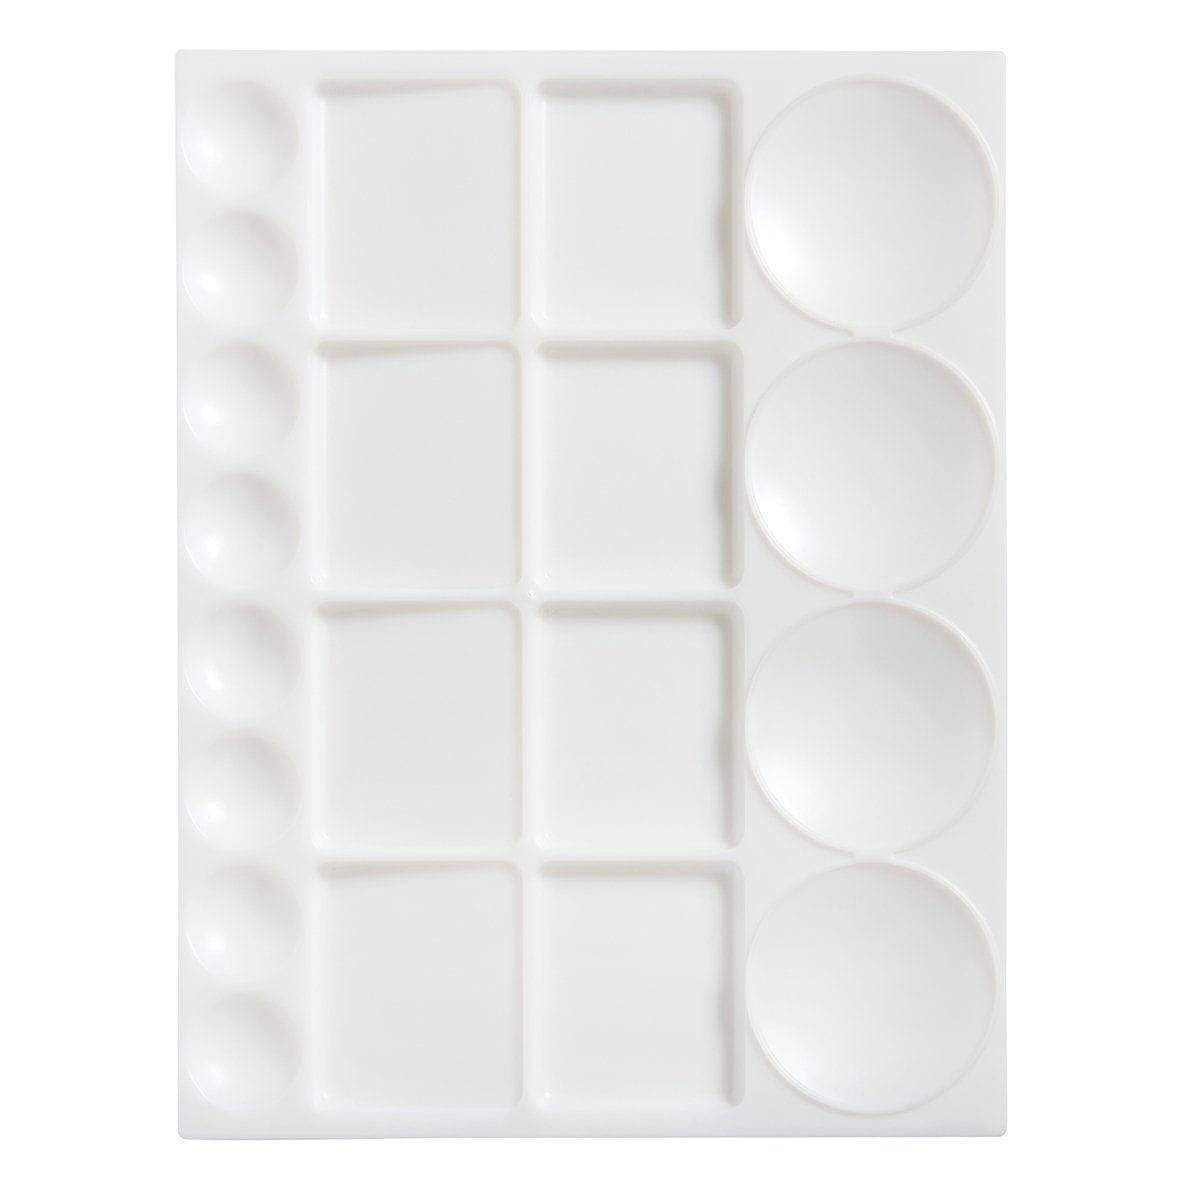  6 Pcs Plastic Palette for Oil 20 Well 13 x 10 Inches Watercolor  Palette White Paint Tray Palette Paint Trays for Acrylic Paint Oil  Watercolor Paints : Arts, Crafts & Sewing